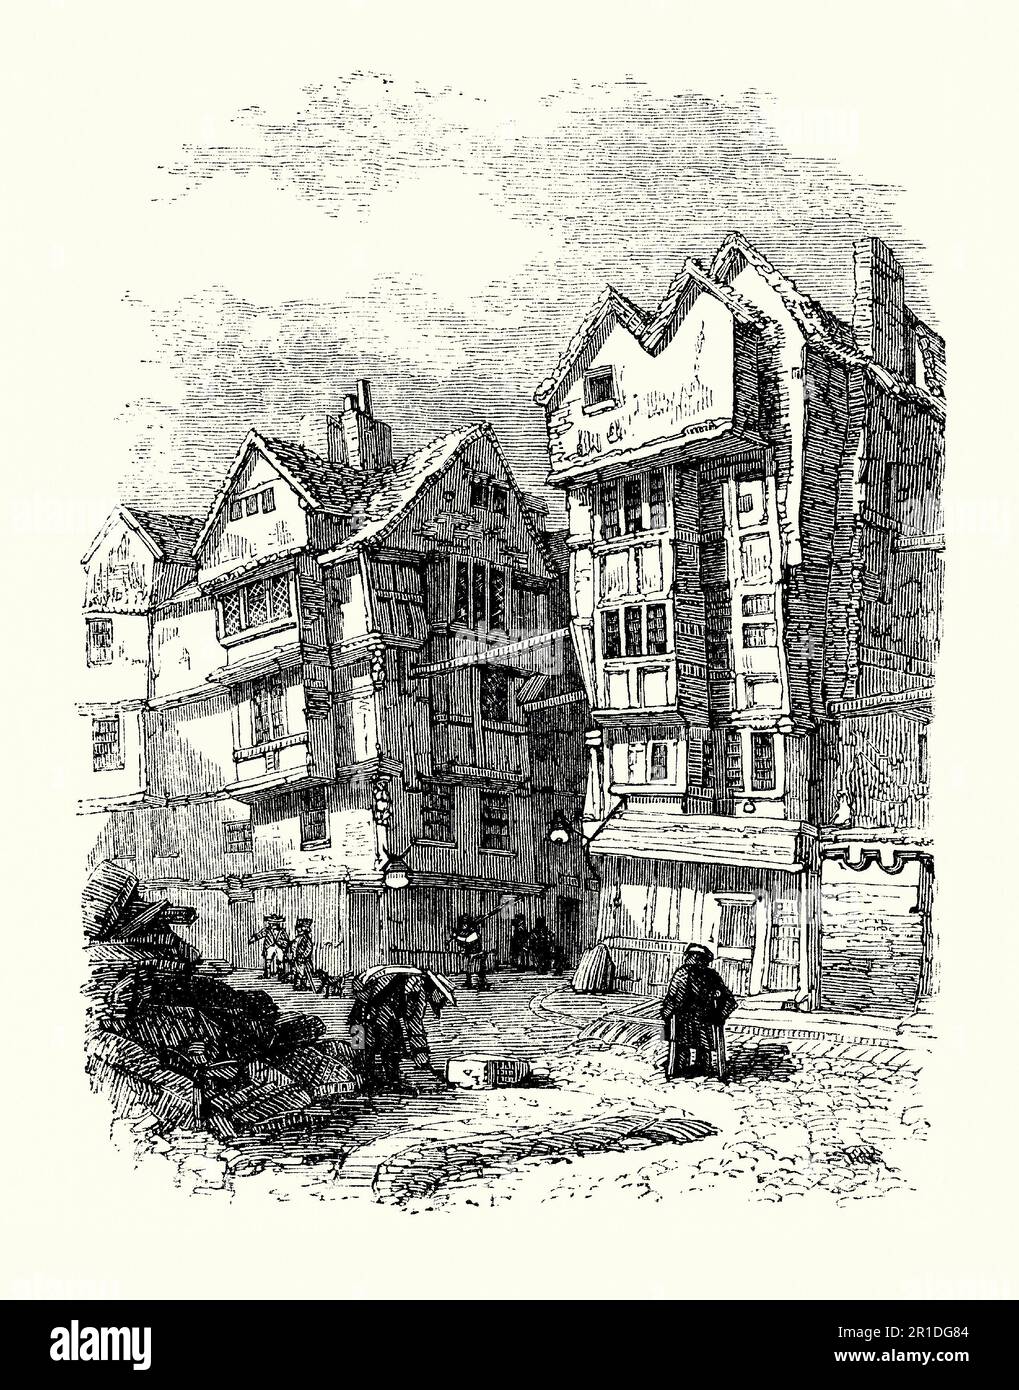 An old engraving of old timbered houses in Butchers Row, Strand, London, England, UK c. 1600. Poor quality housing in close proximity to each other in narrow lanes led to unsanitary conditions and helped the spread of disease – here rubbish is piled up in the street (left). Overhanging upper stories (a jetty or jetties) meant the houses were really close to those across the street. Note the horizontal wooded props used to stabilise the buildings and help prevent collapse. Stock Photo